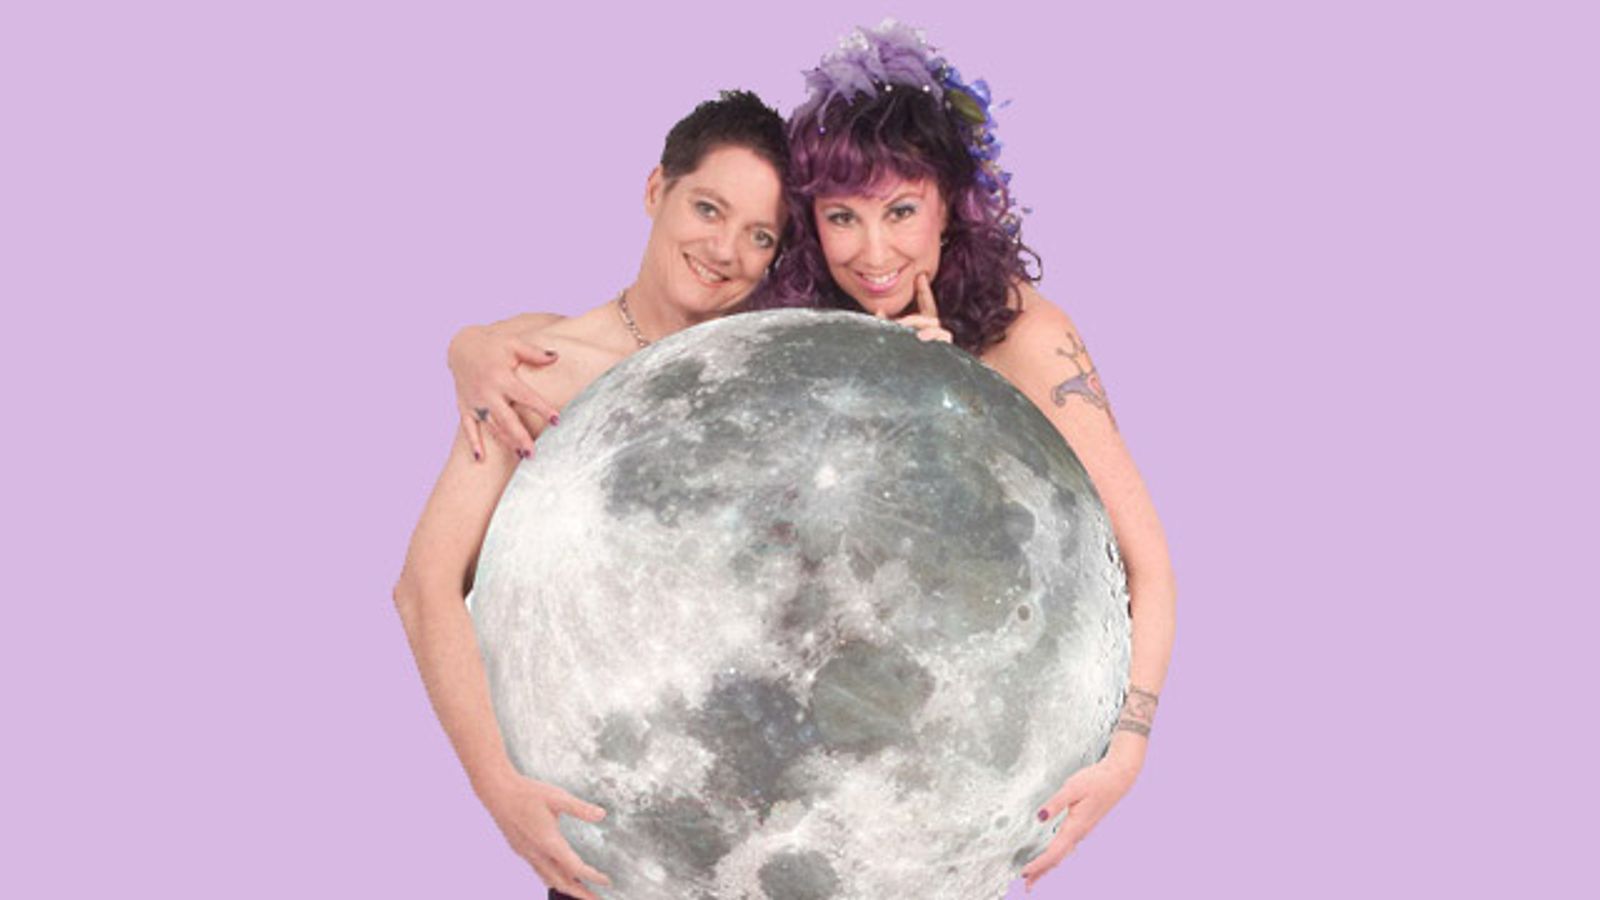 Annie Sprinkle, Other Ecosexuals, Gather for Purple Wedding to the Moon